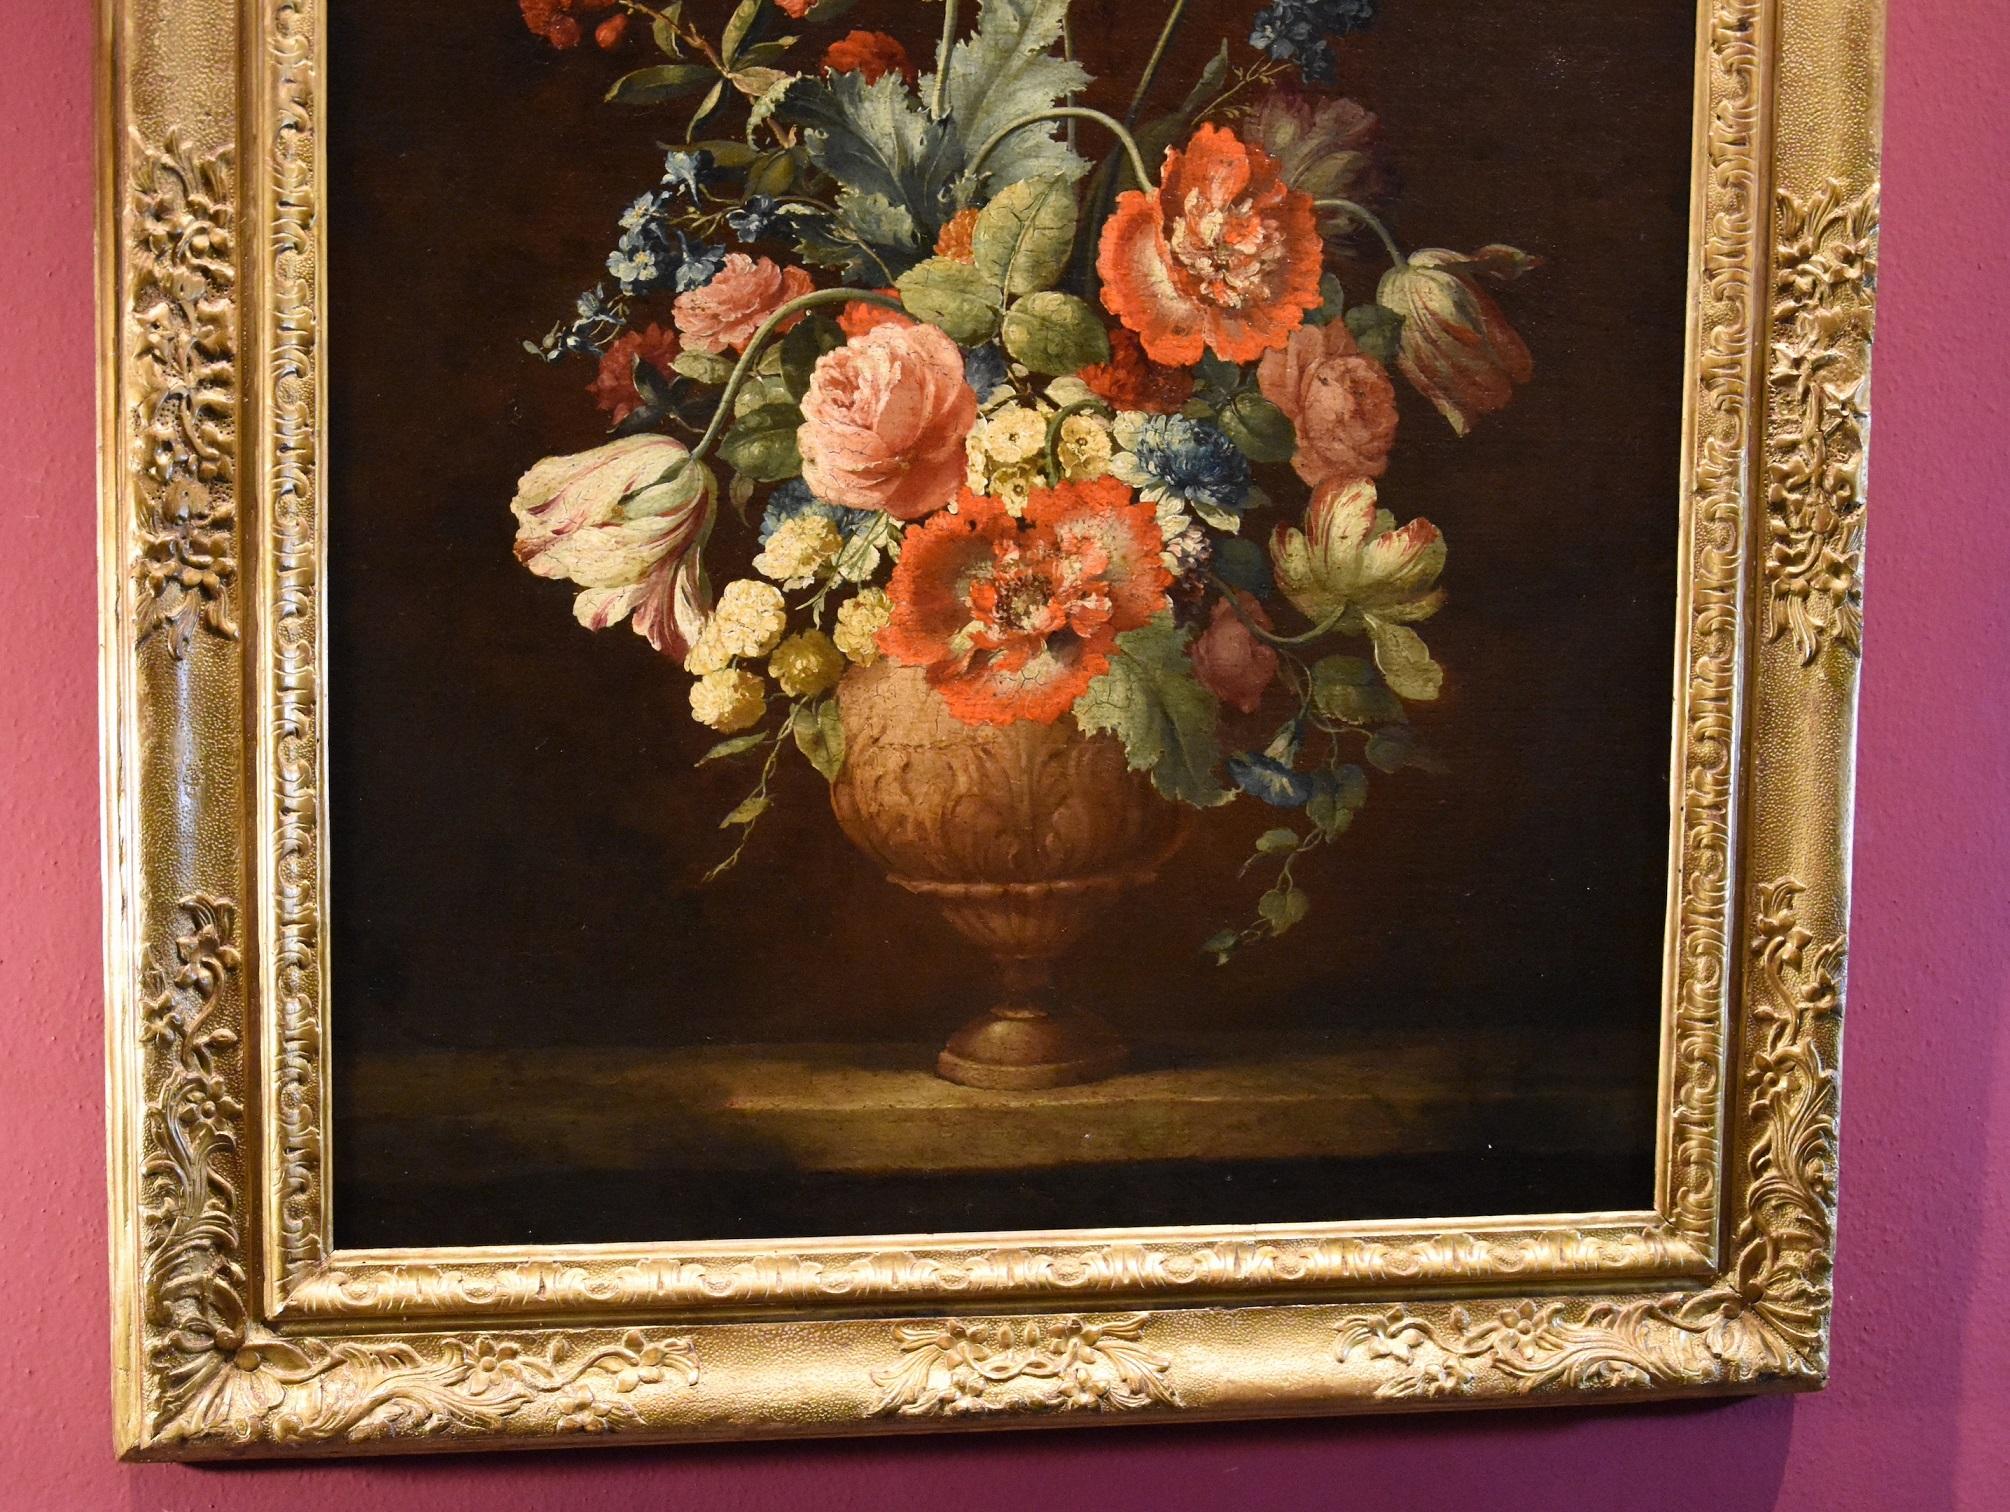 Jacob van Huysum (Amsterdam, 1687 - London, 1746) Attributable
Still Life of Flowers in a Stone Vase

Oil on canvas
76 x 63 cm. - Framed 93 x 80 cm.

In this sumptuous still life, we see a classical stone vase containing a fine floral bouquet of